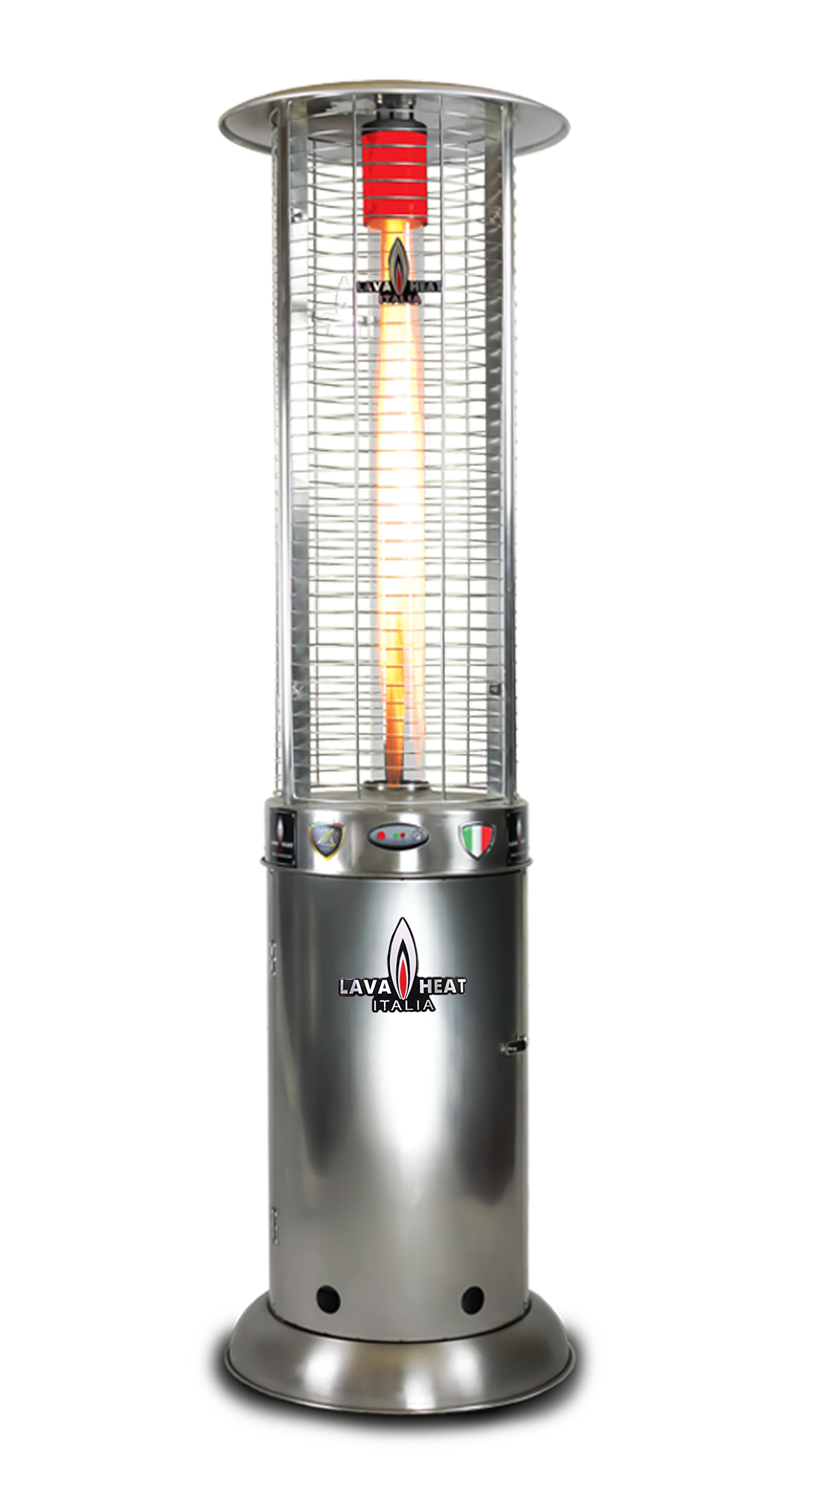 The Lava Heat Italia R-Line 7 Foot Commercial Flame Tower Heater, Manual Ignition, Stainless Steel Finish, Natural Gas